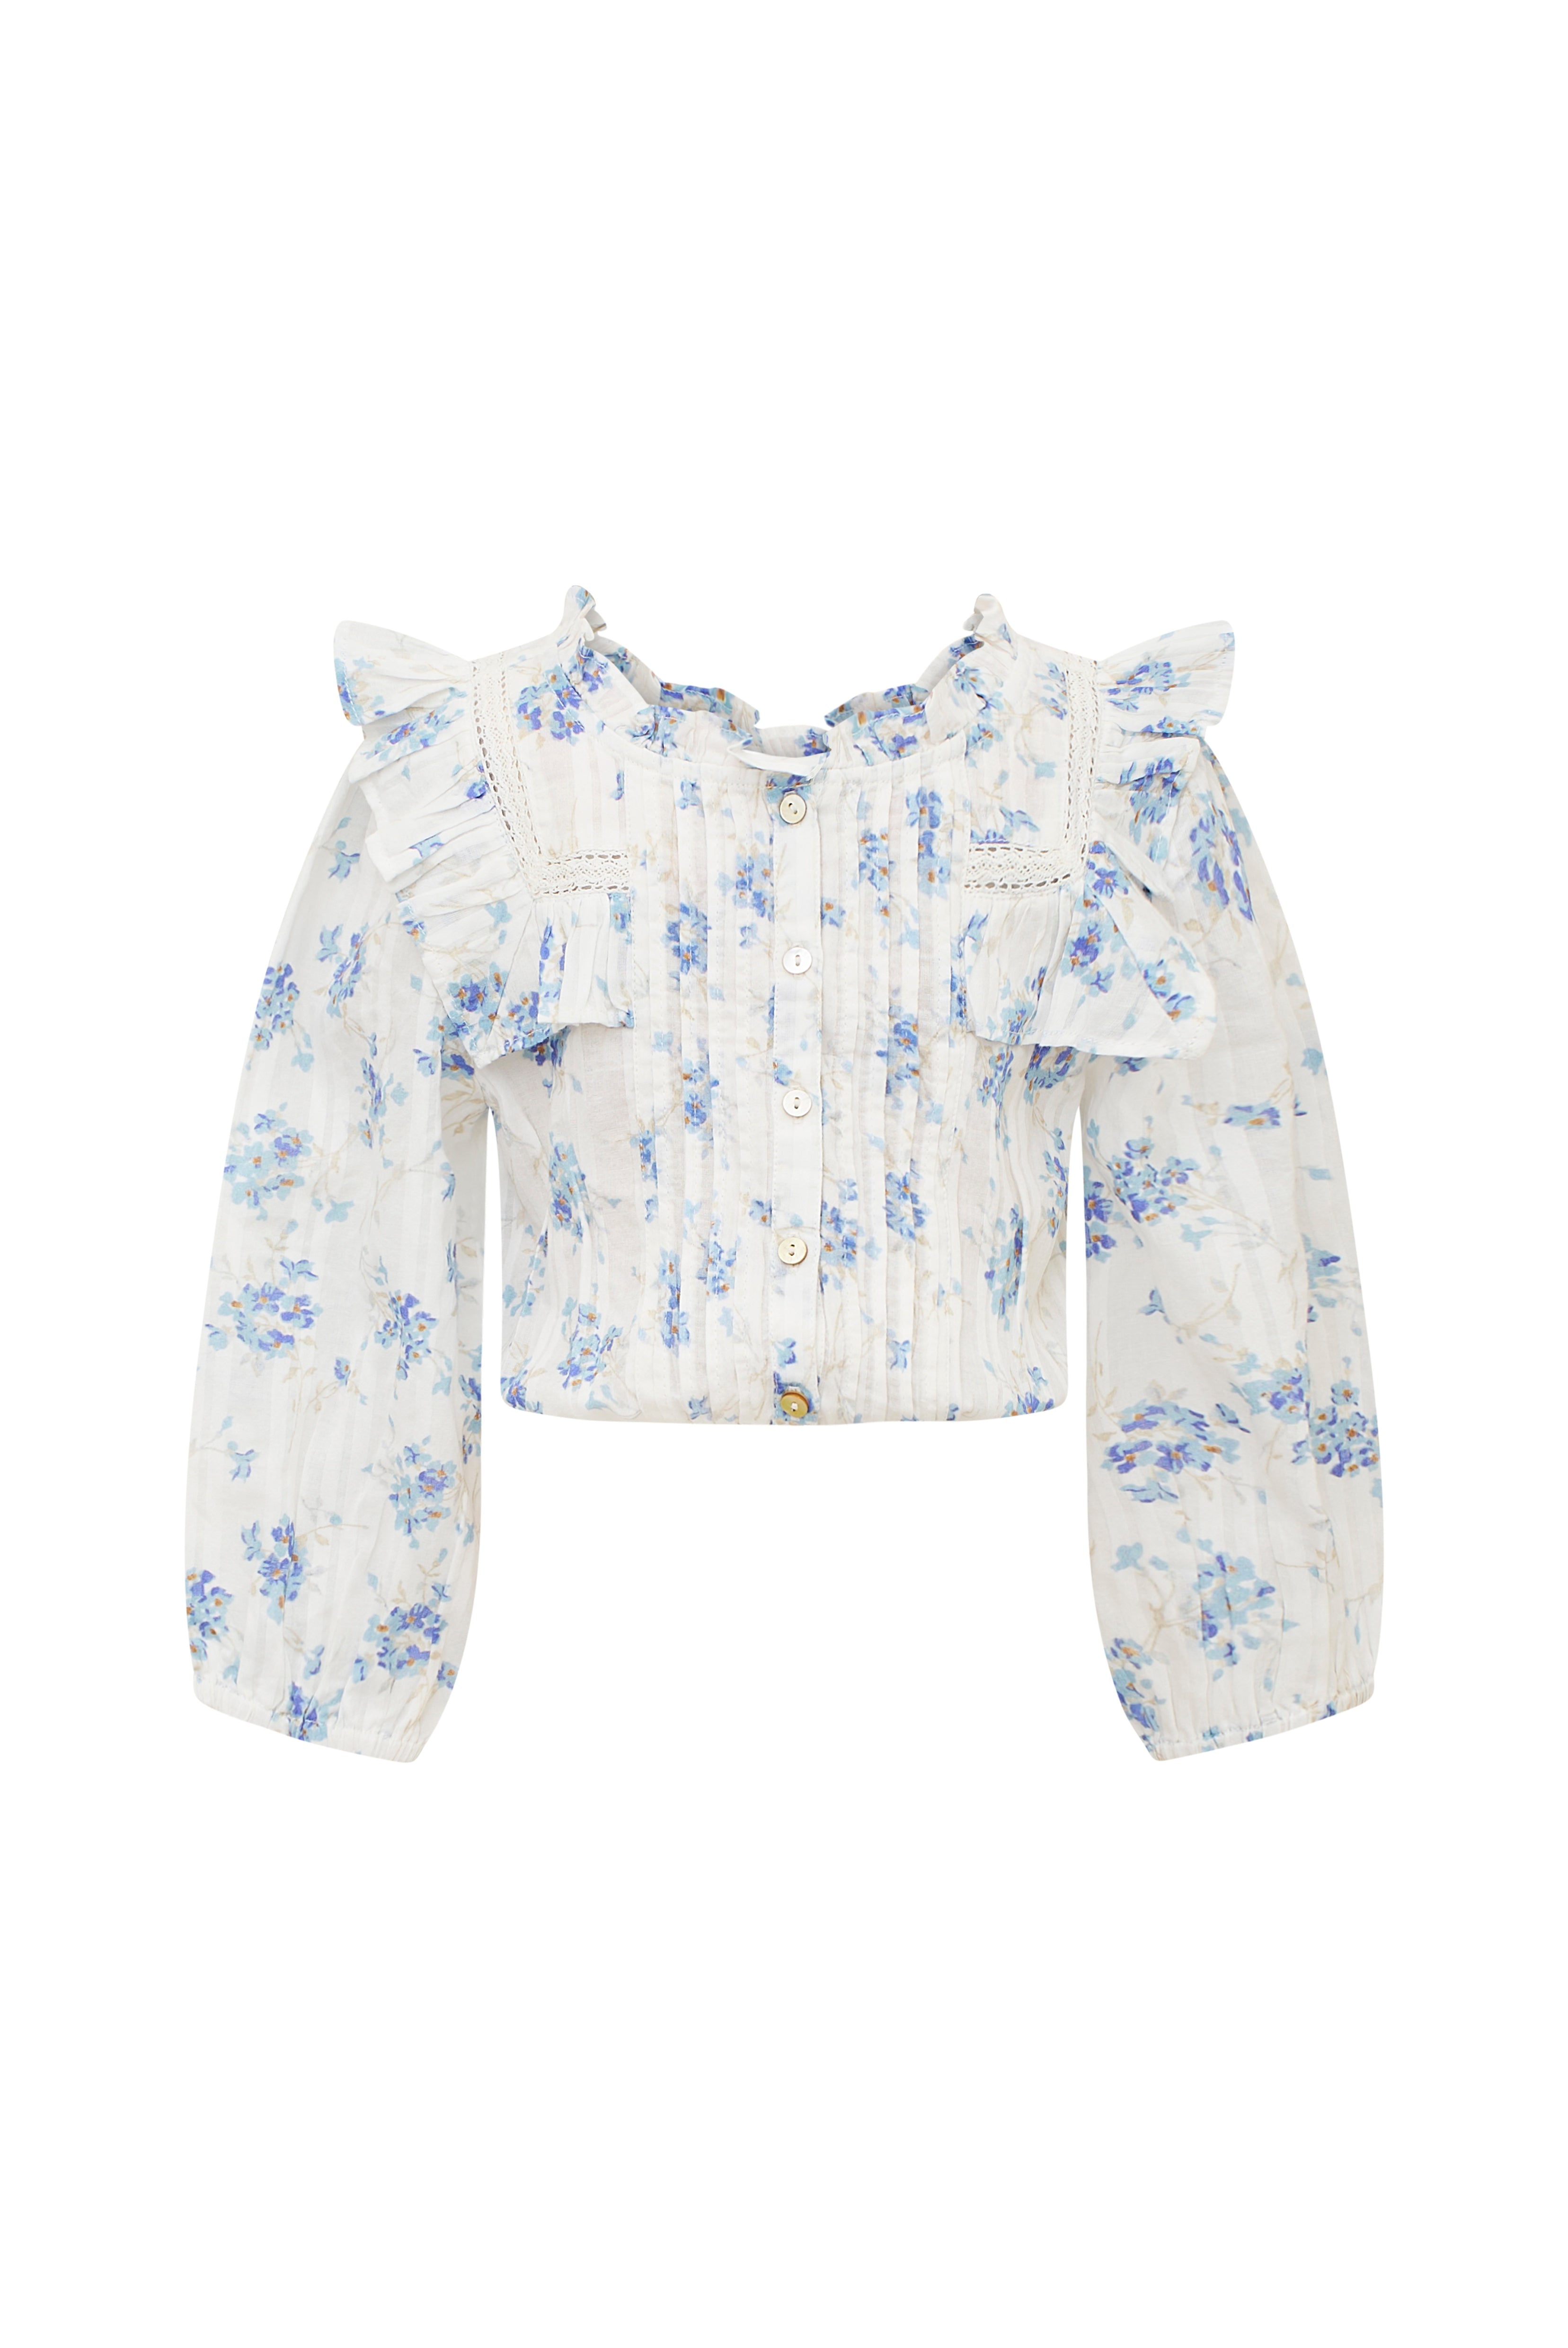 Girls top featuring intricate custom lace detail at the round neckline and throughout the ruffle-adorned bib, airy long sleeves and small embroidery detail all over.